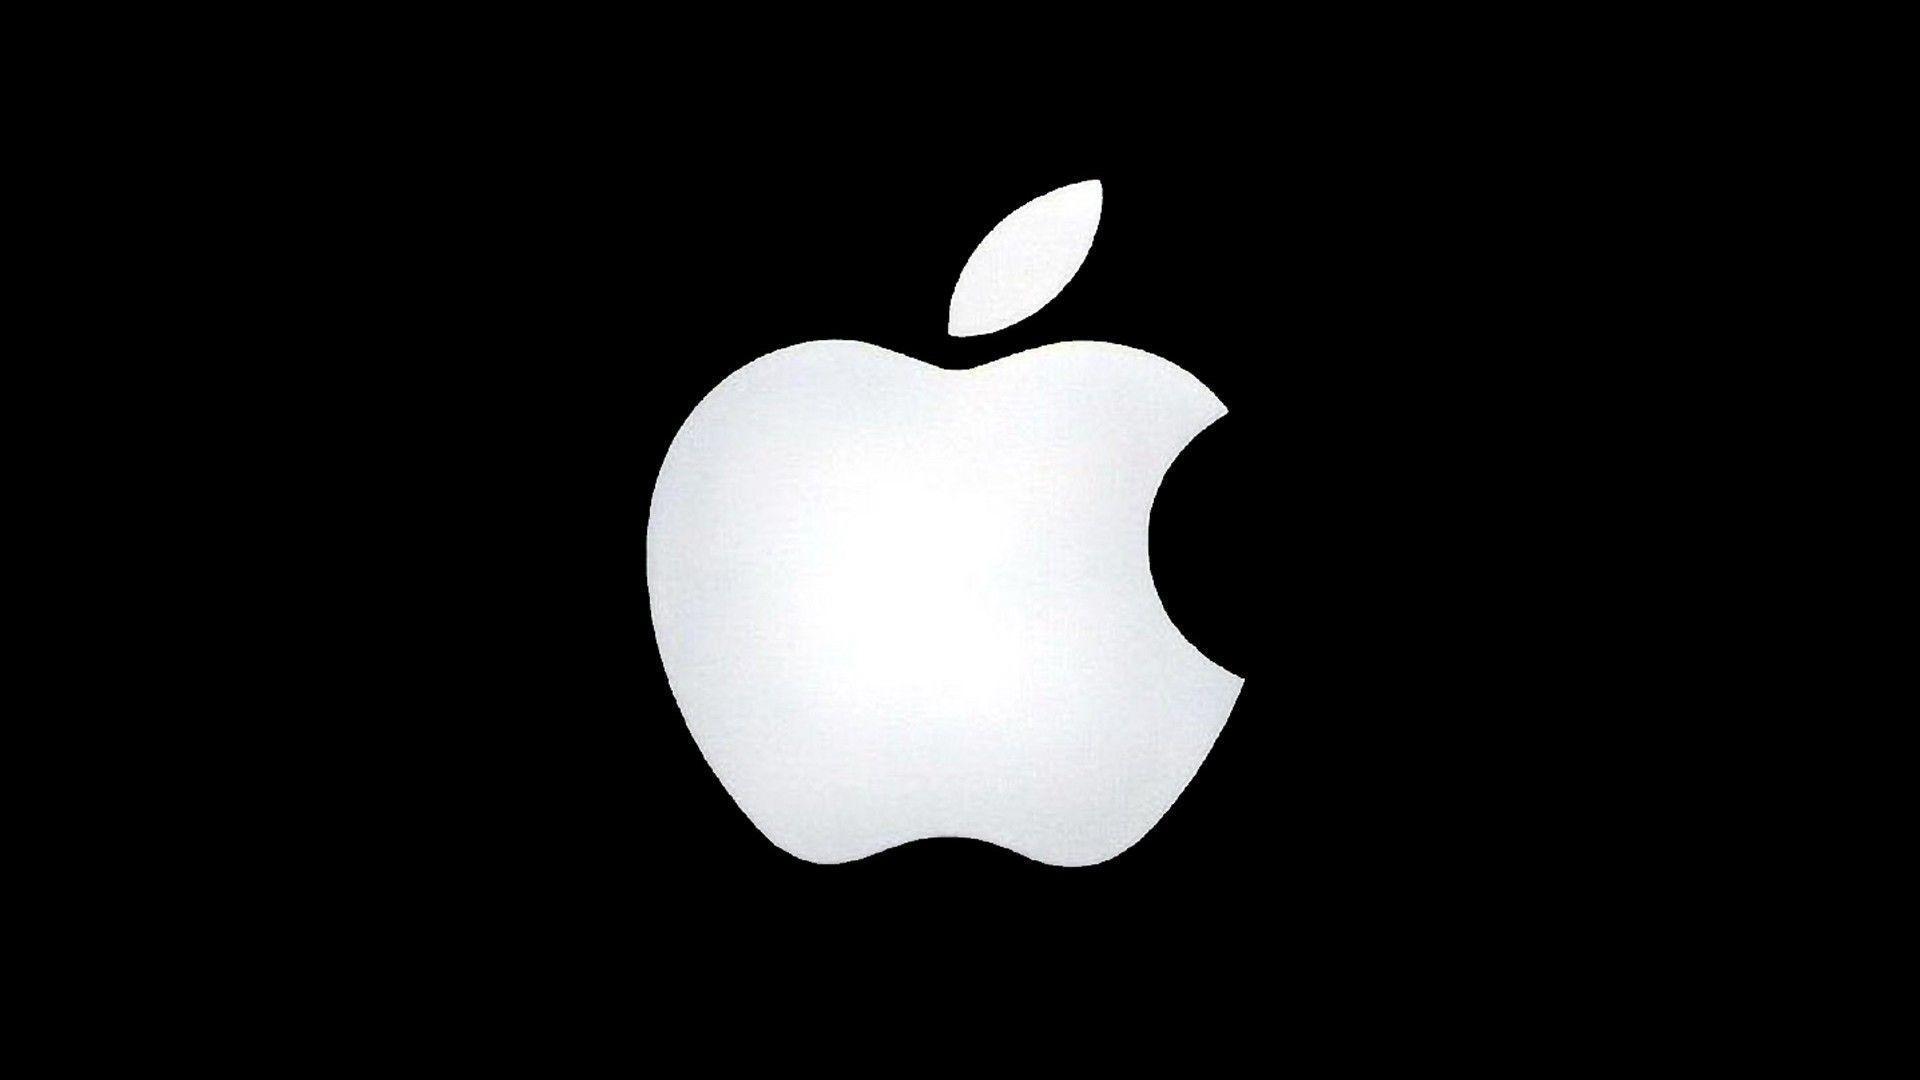 Black and Wight Logo - Black And White Apple Wallpapers - Wallpaper Cave